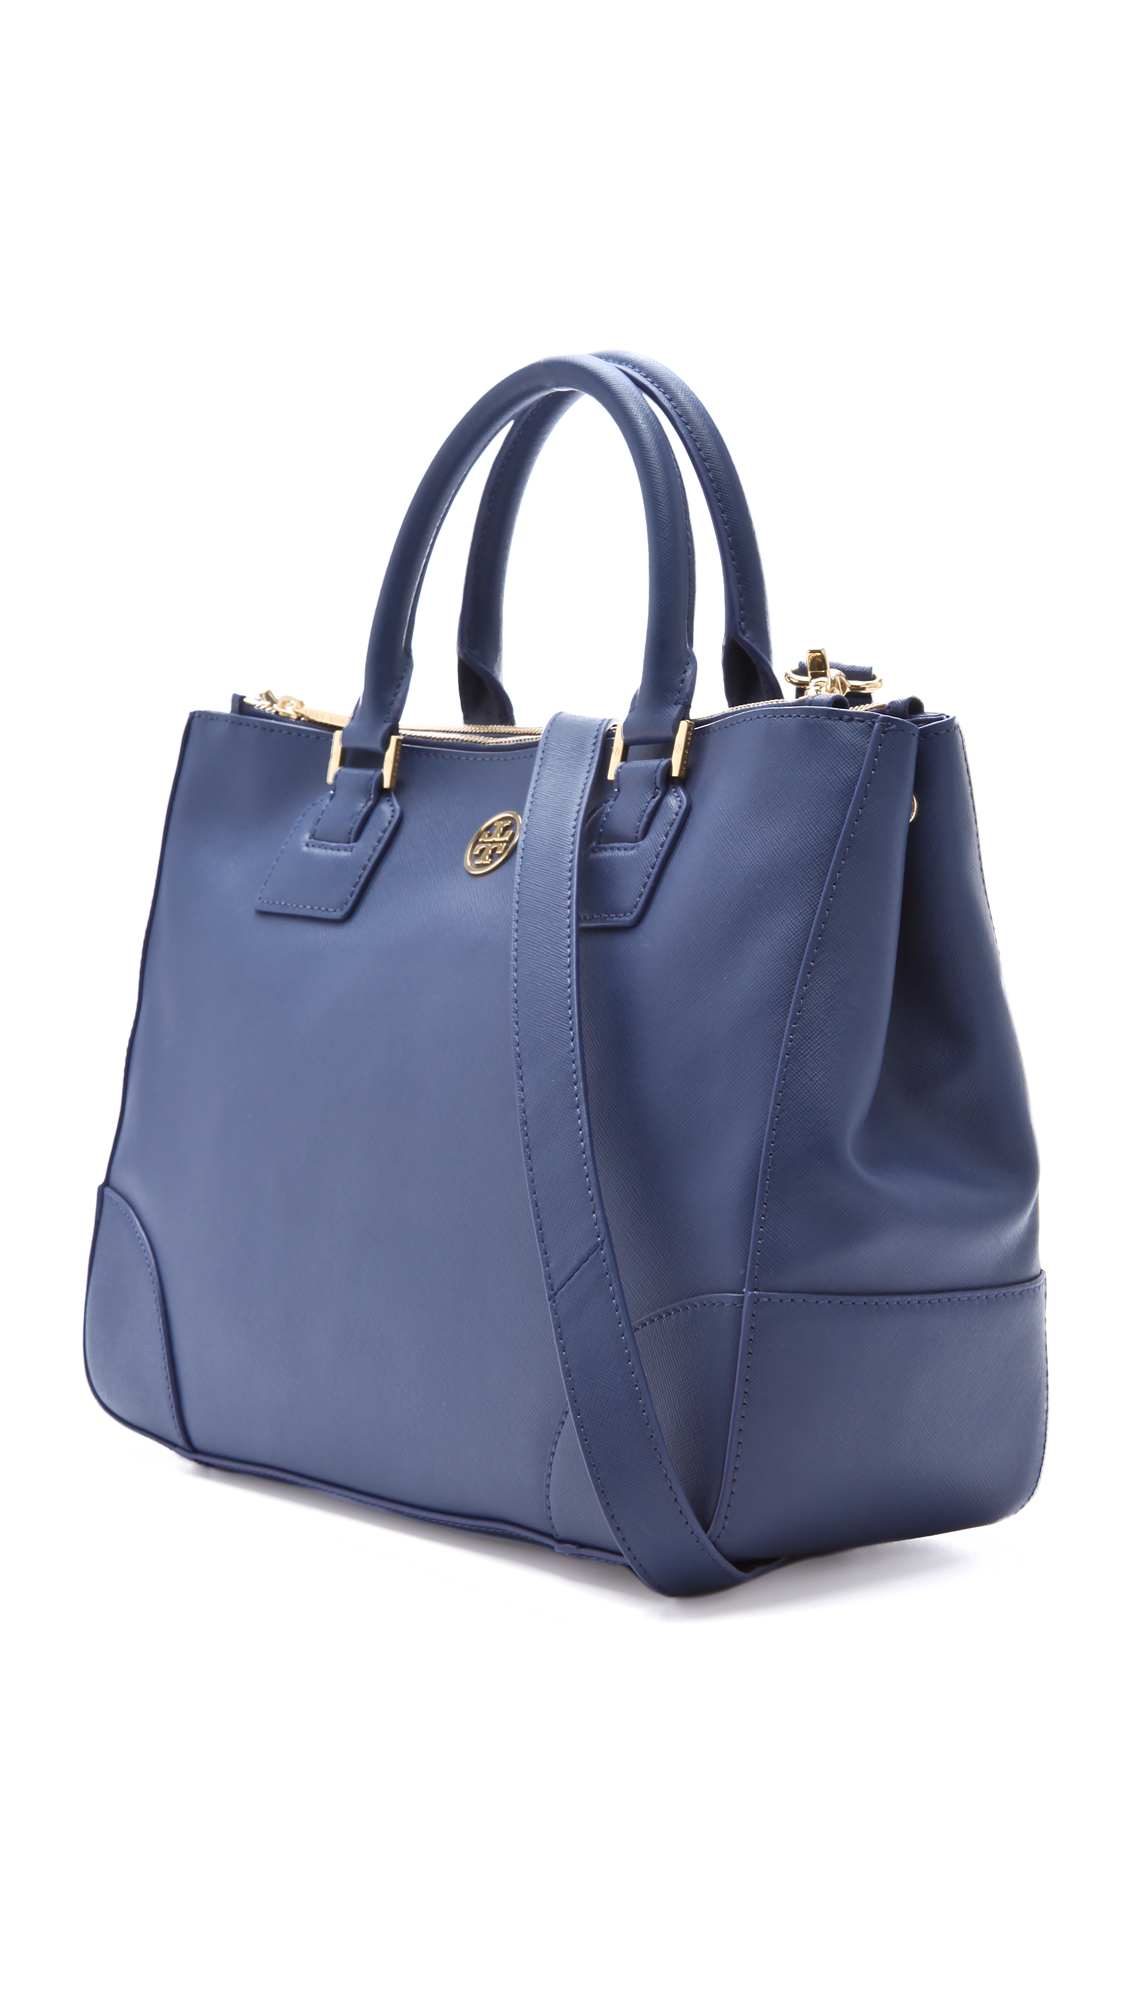 Total 36+ imagen tory burch robinson tote blue